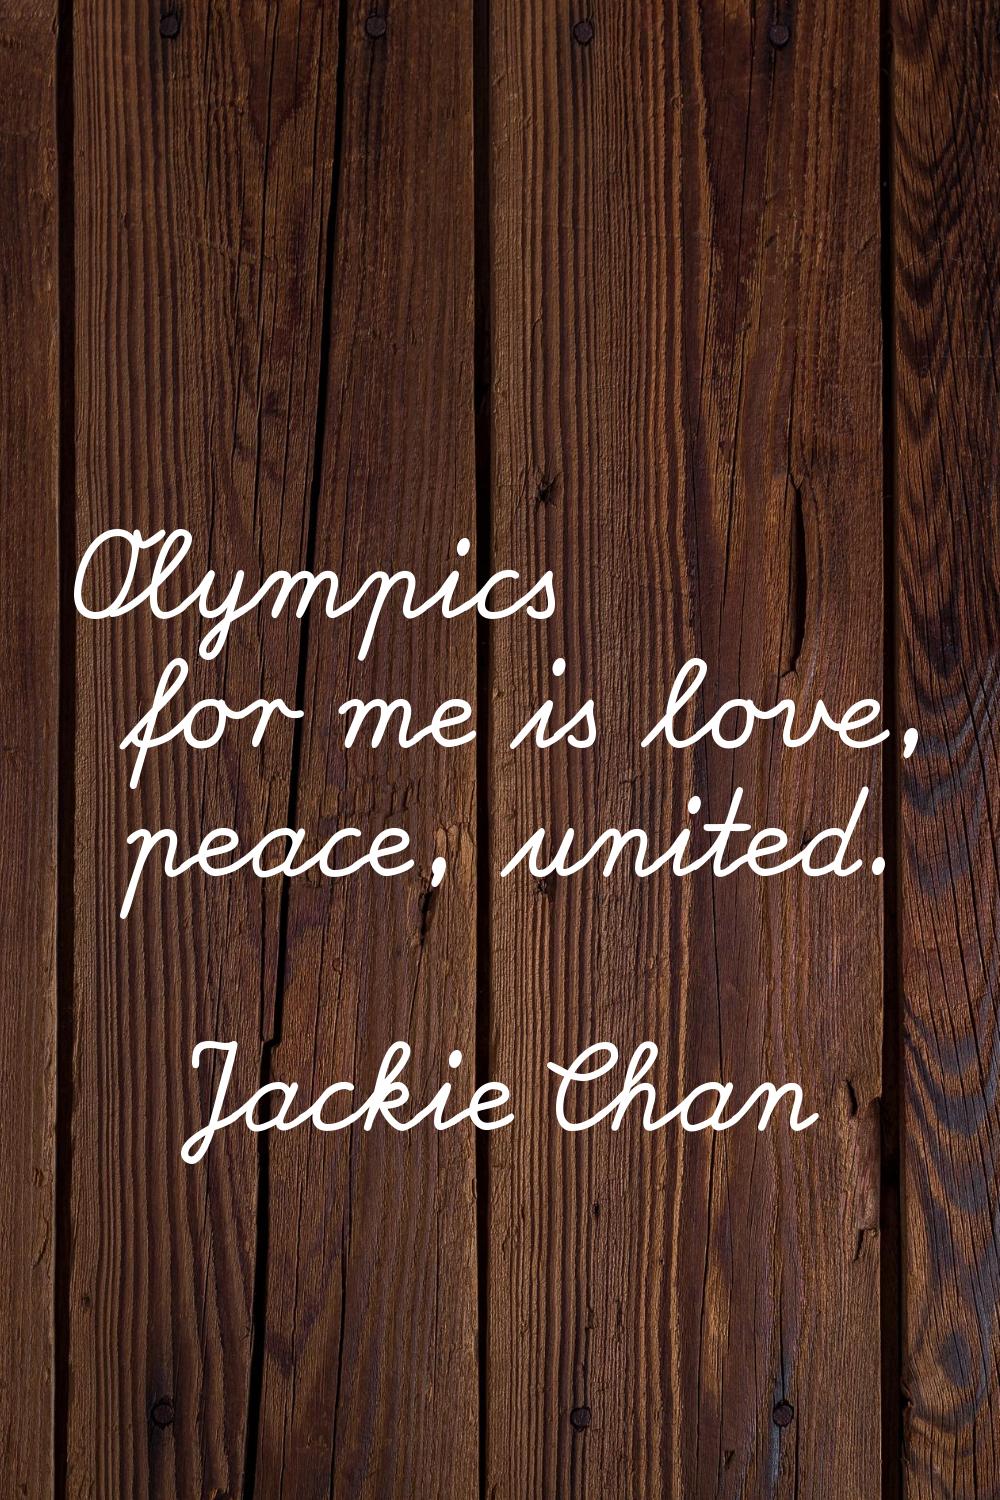 Olympics for me is love, peace, united.